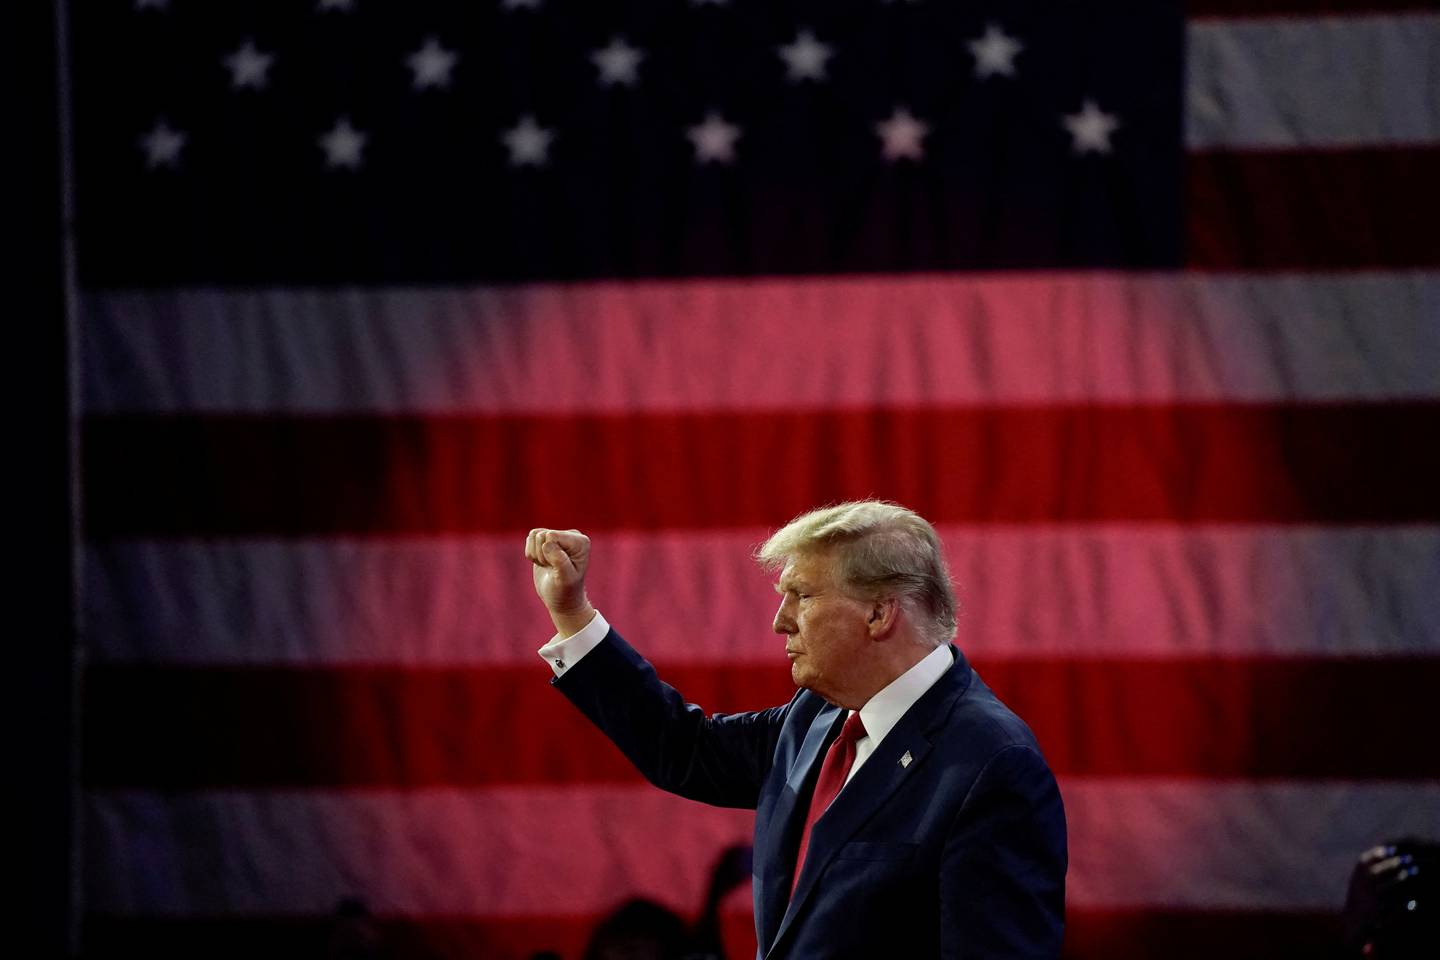 FILE PHOTO: Former U.S. President and Republican presidential candidate Donald Trump gestures after addressing the Conservative Political Action Conference (CPAC) annual meeting in National Harbor, Maryland, U.S., February 24, 2024. REUTERS/Elizabeth Frantz/File Photo